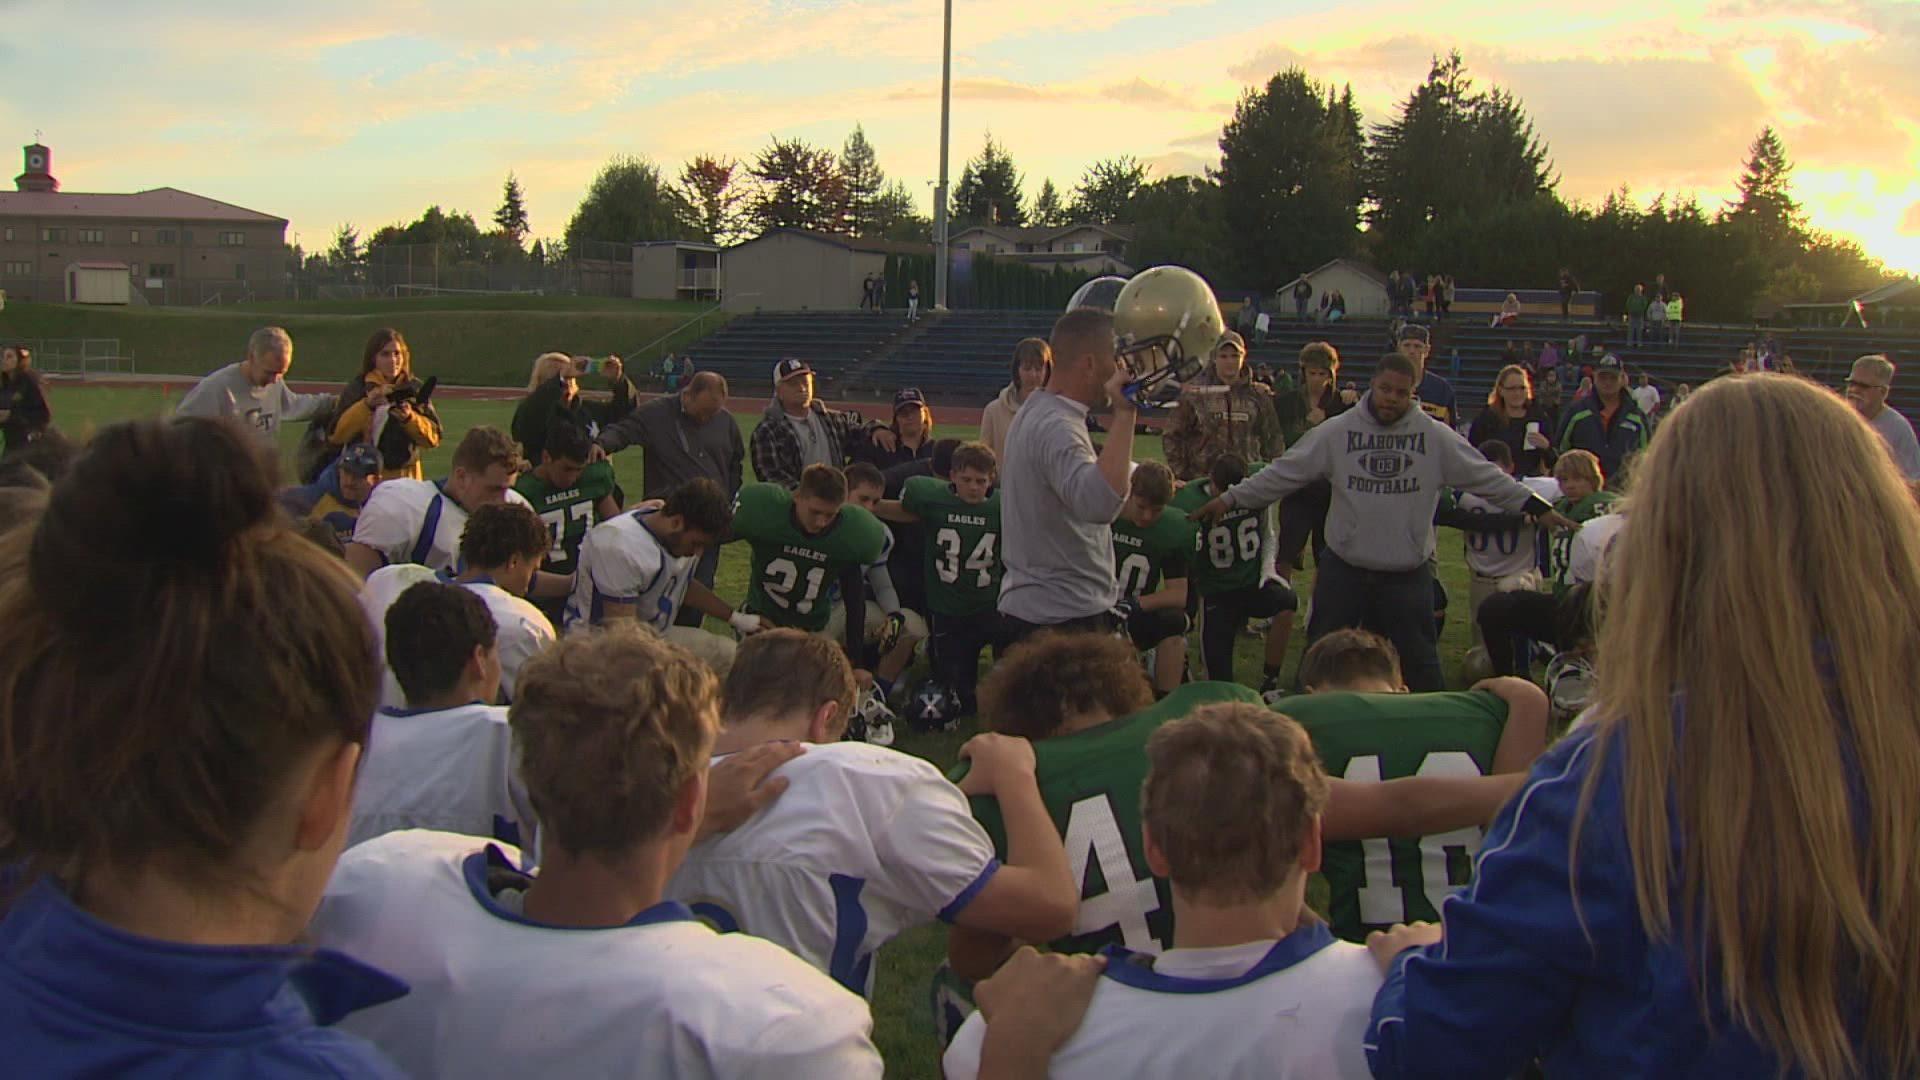 The Supreme Court said Monday that former Bremerton High School football coach Joe Kennedy’s prayer after games was protected by the First Amendment.